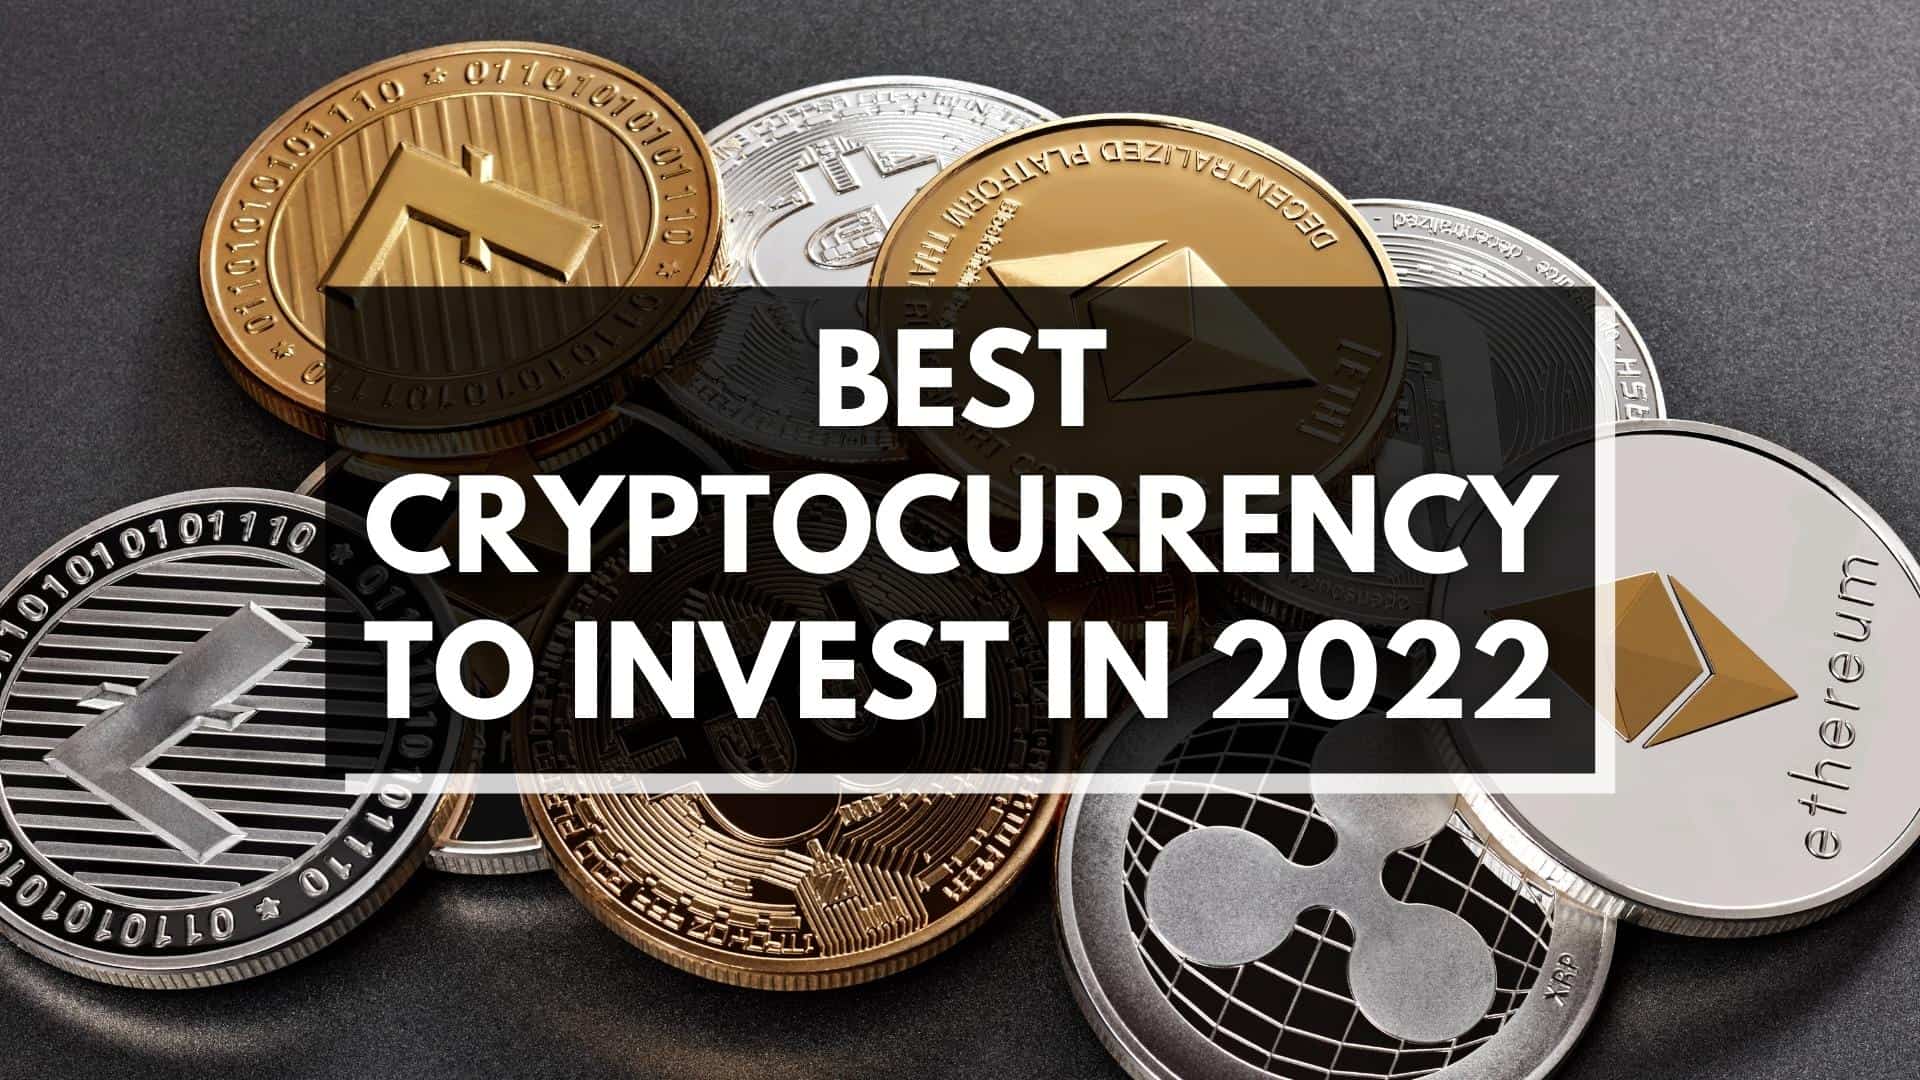 What Cryptocurrency To Invest In 2022